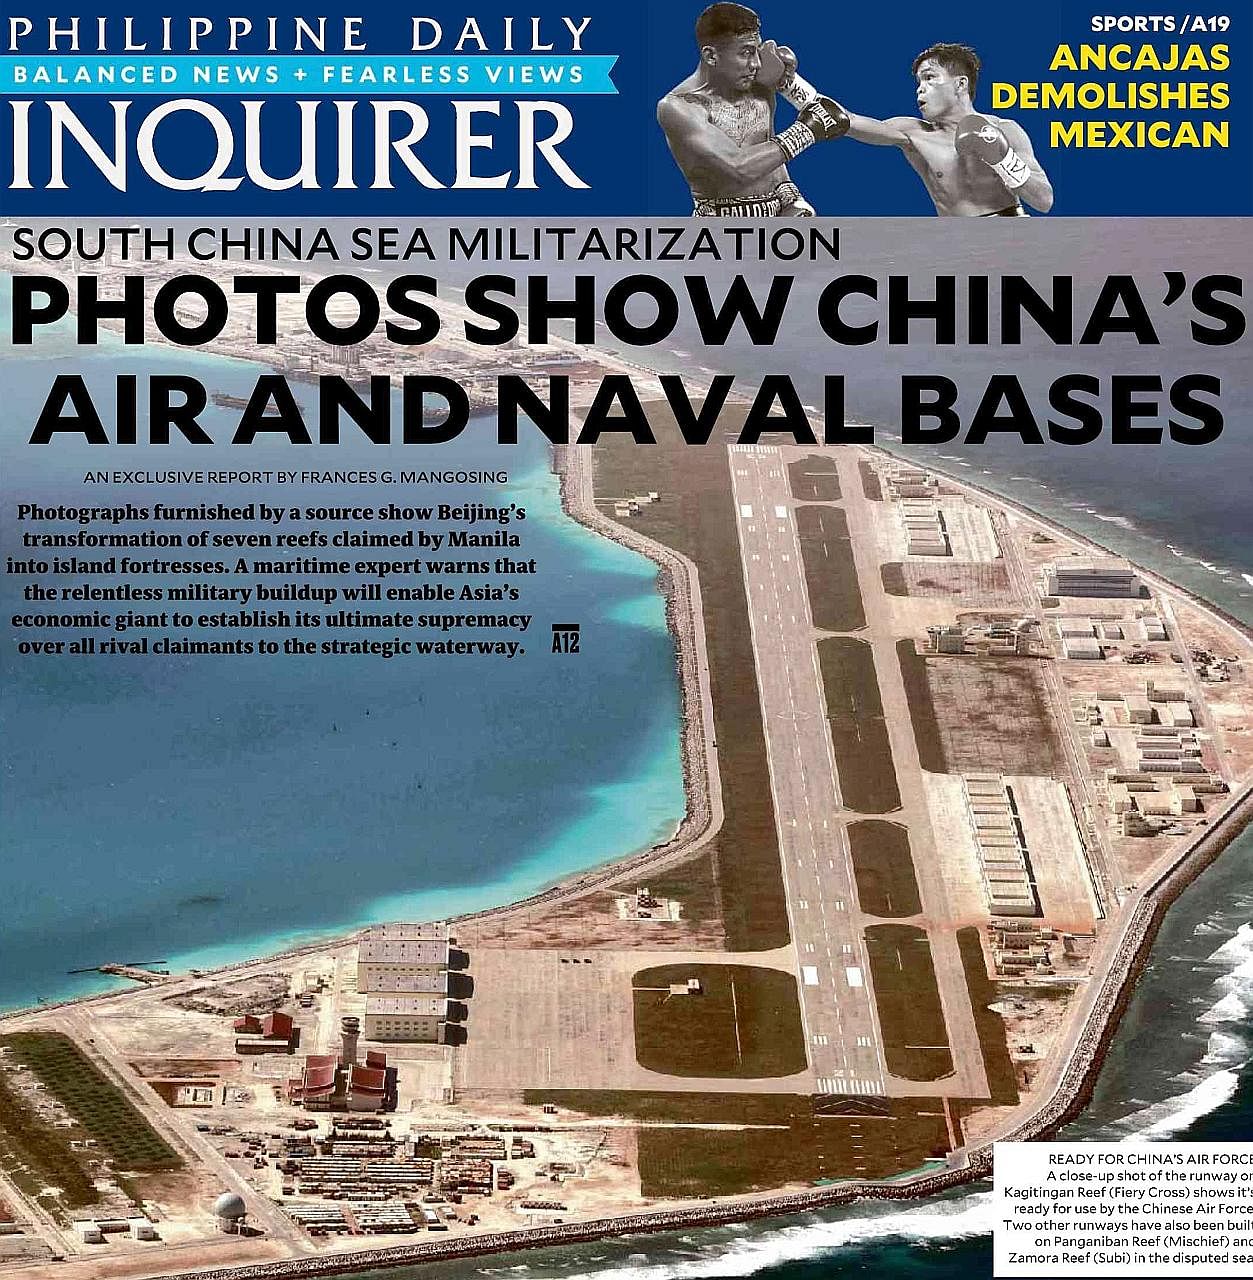 The Philippine Daily Inquirer report published yesterday shows the building of facilities on seven islands that China claims in the South China Sea as nearly done.